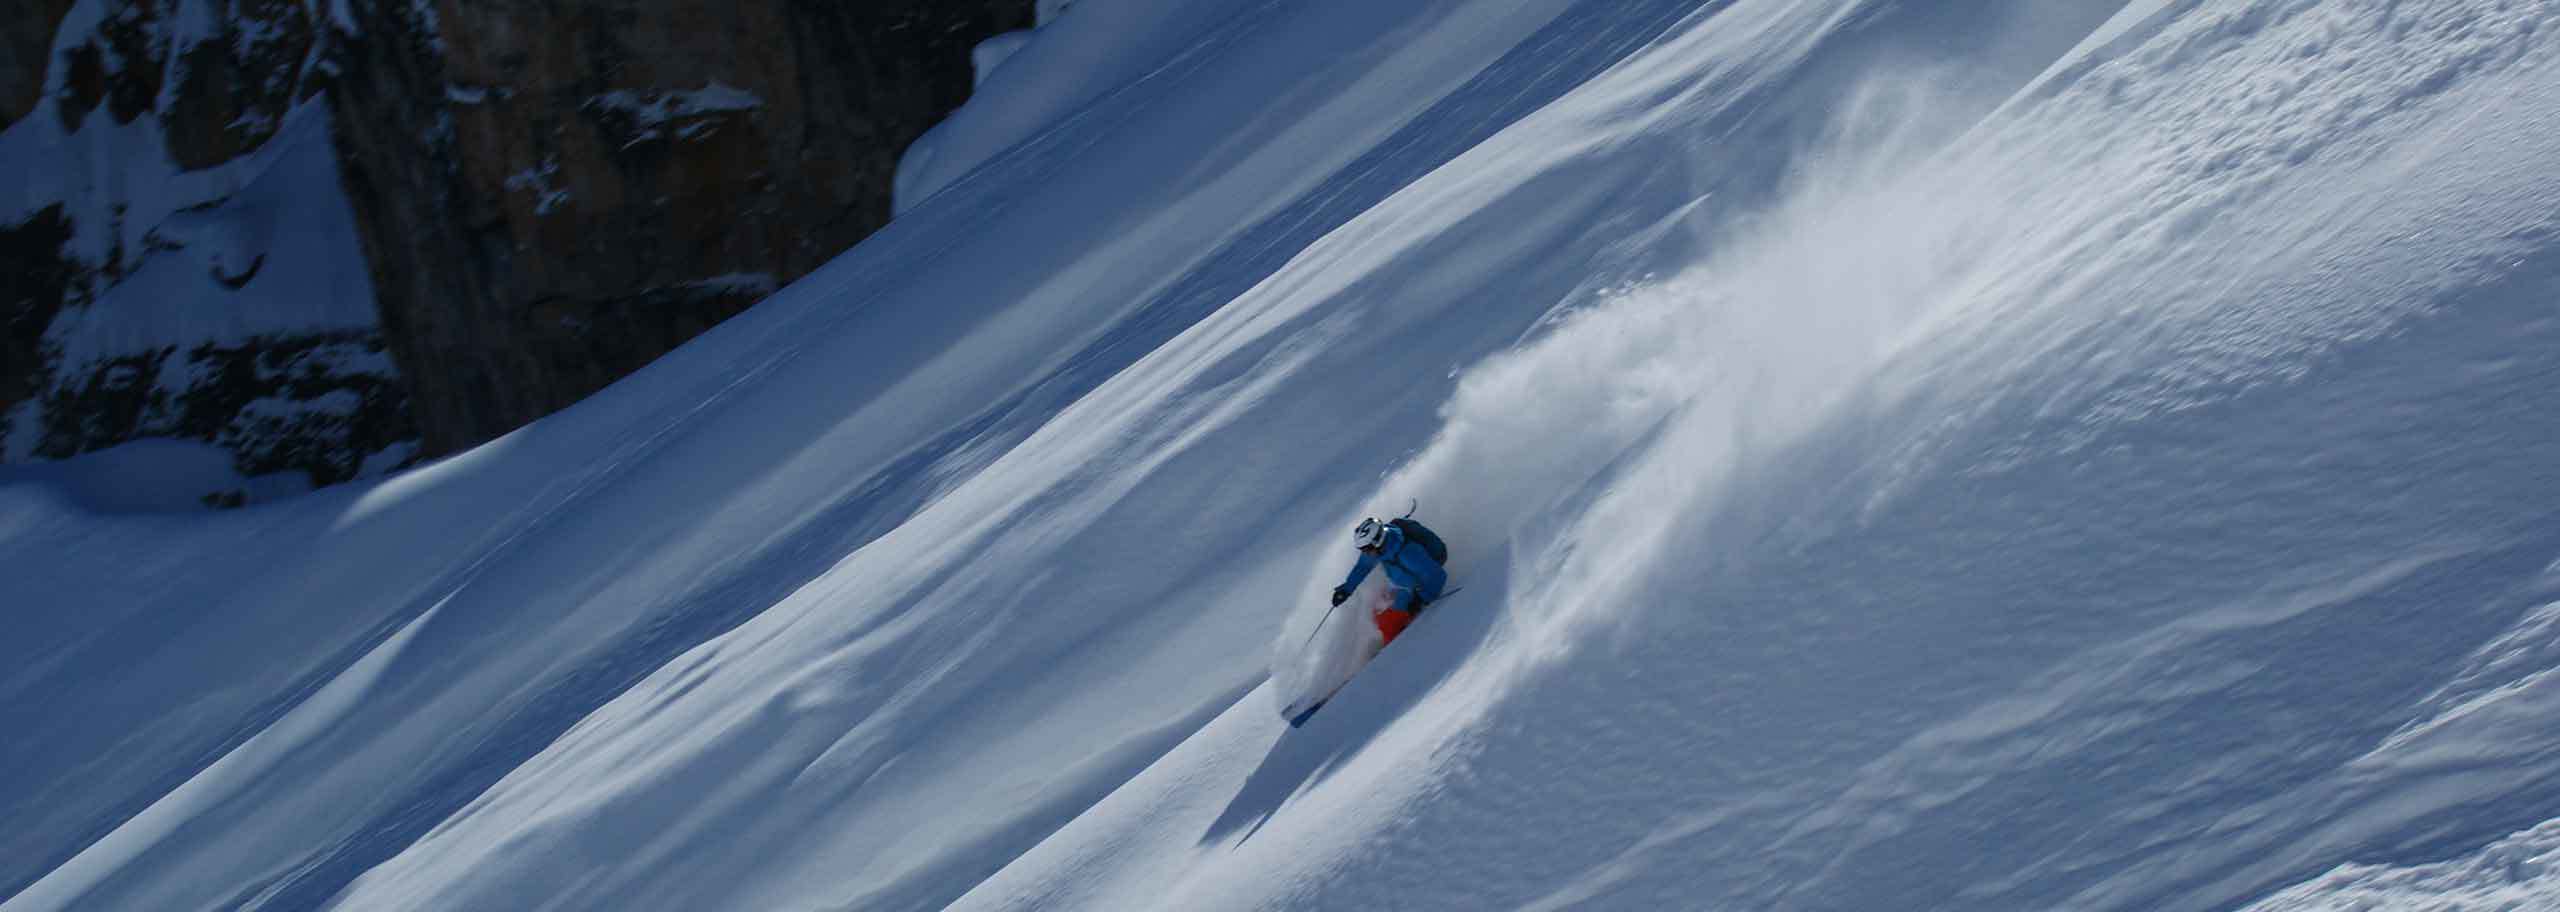 Off-piste Skiing in the Dolomites, Guided Freeride Skiing Trip